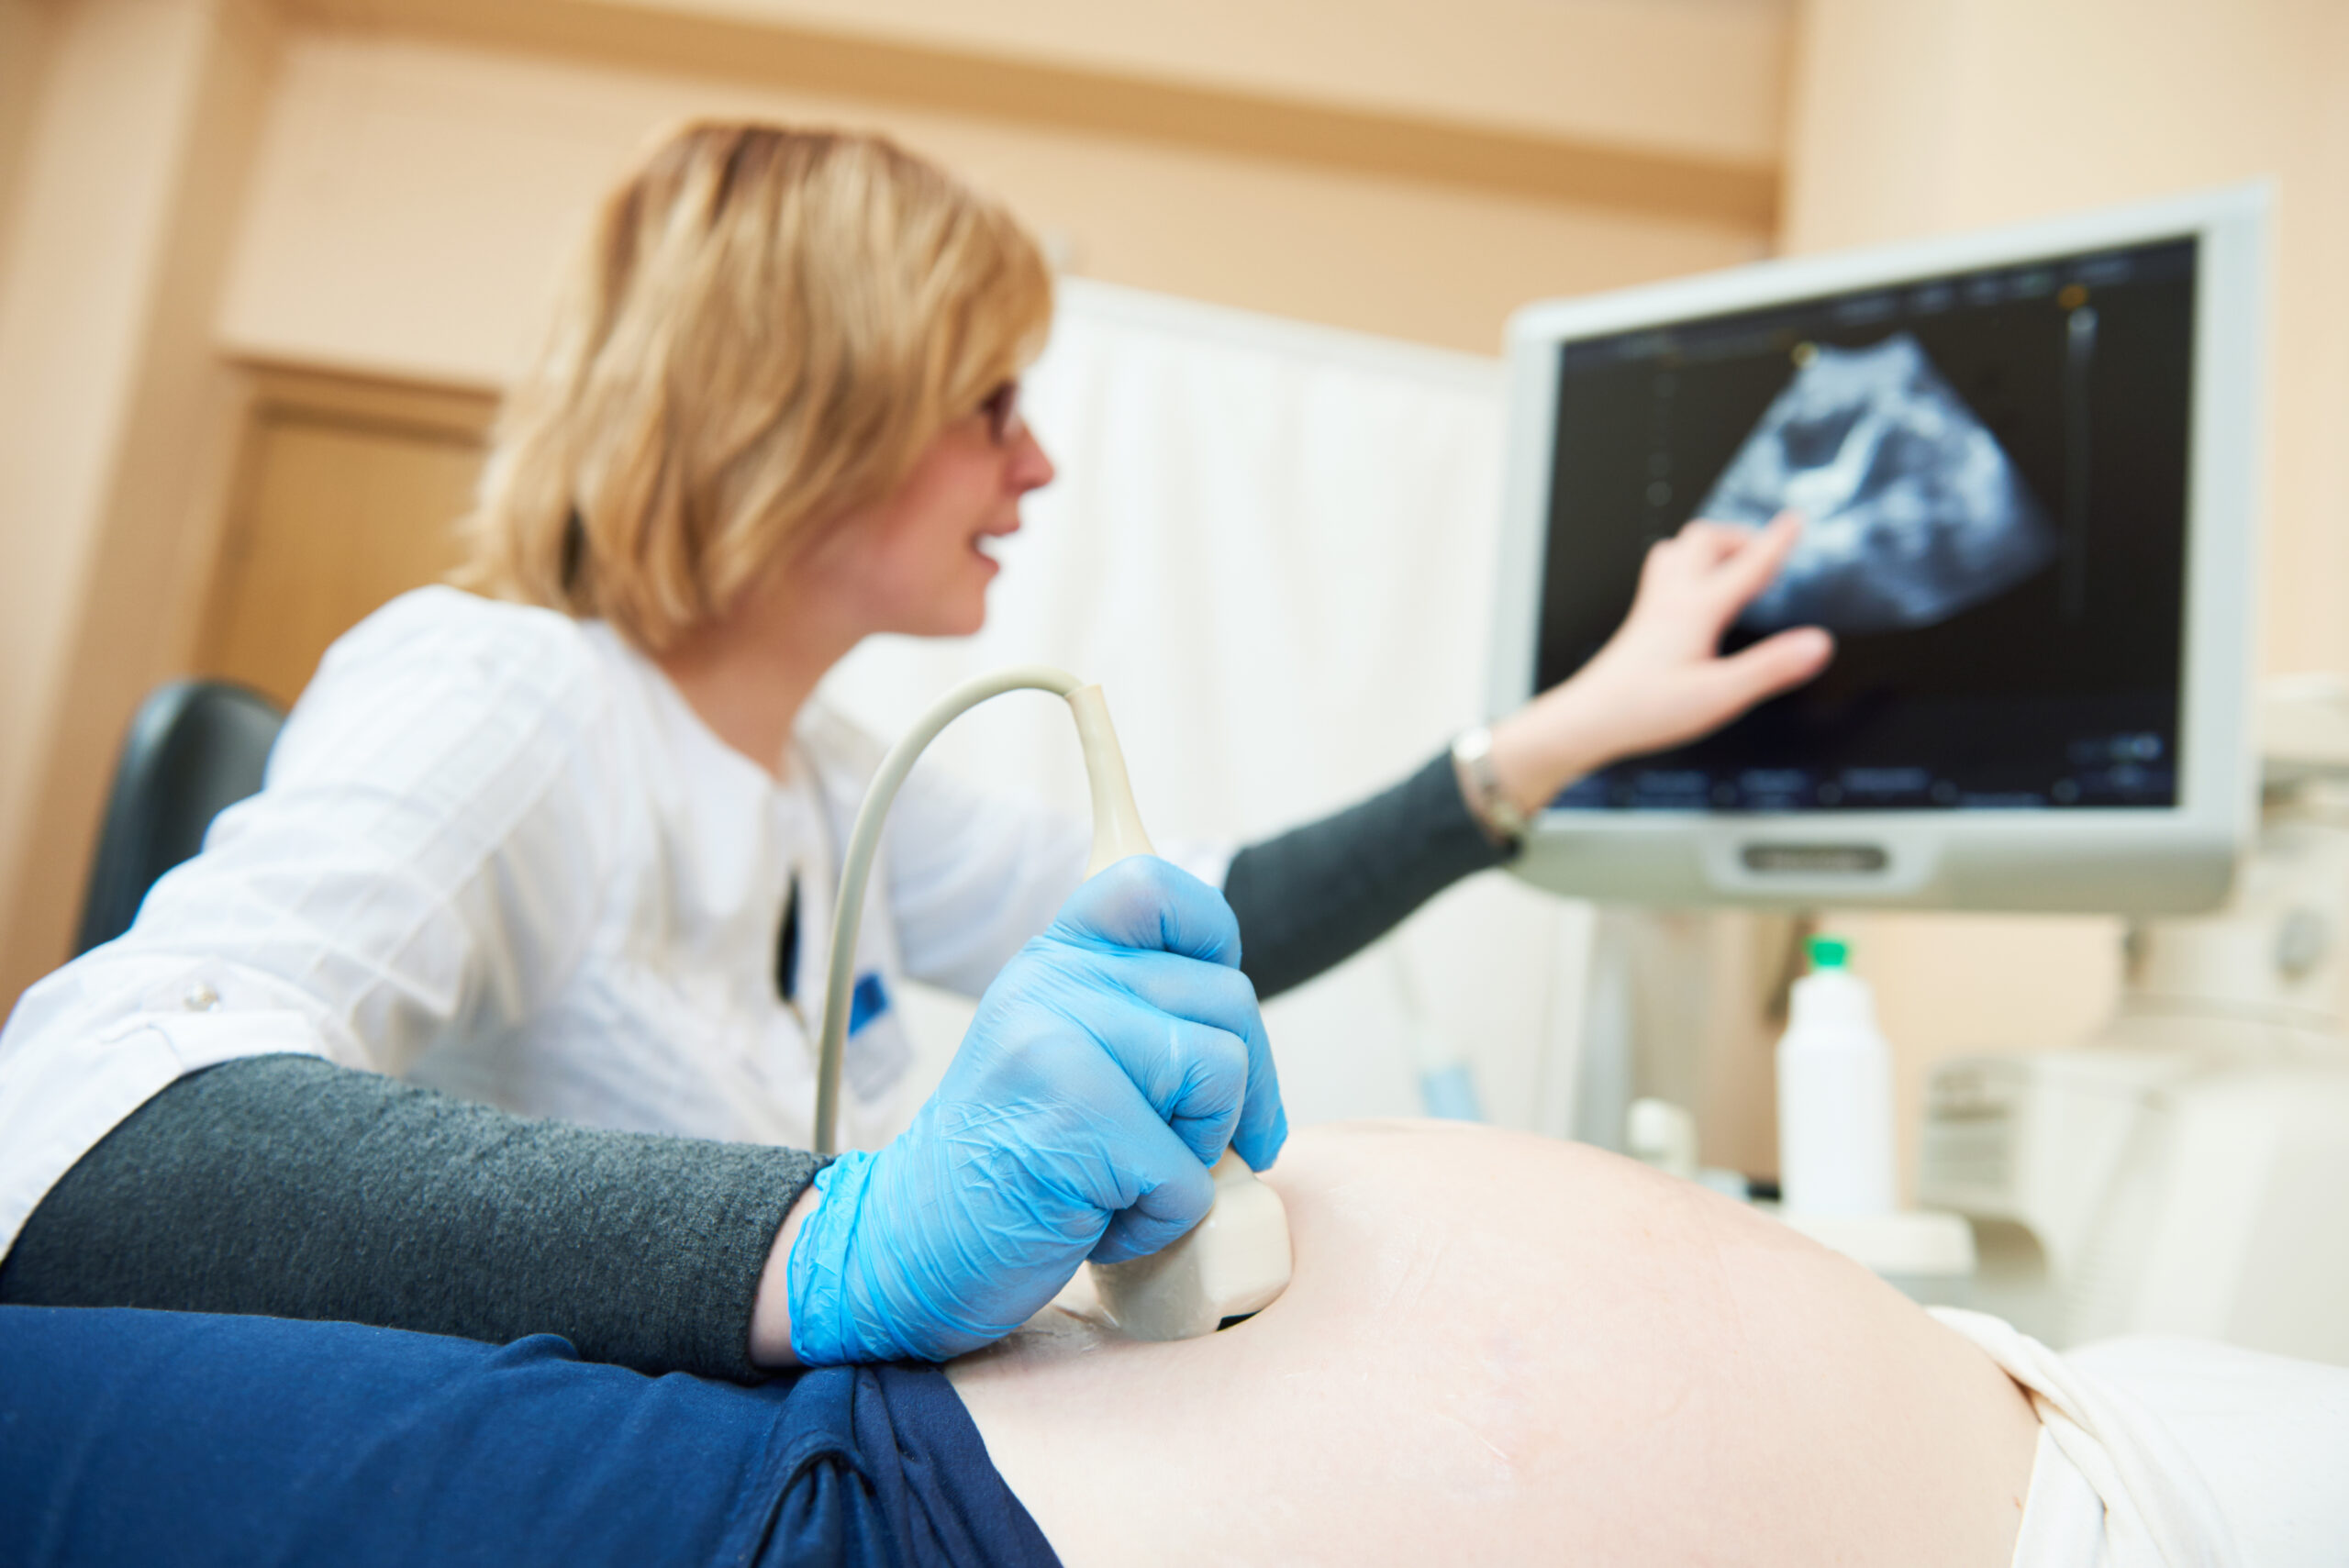 Ultrasound test. Pregnancy. Female gynecologist doctor checking patient's fetal life signs with scanner.